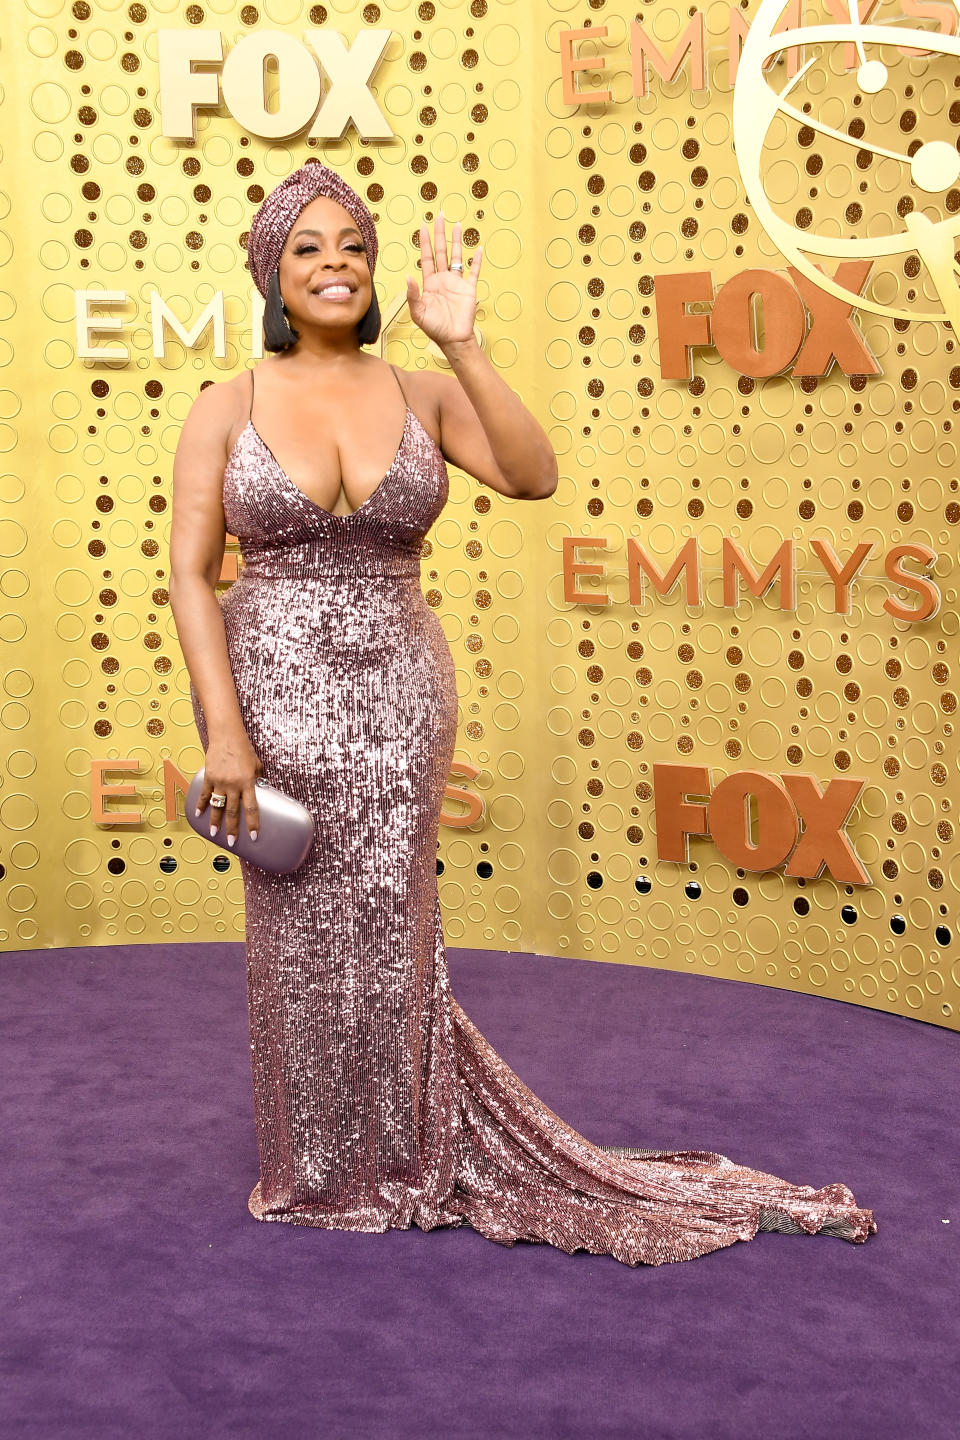 Niecy Nash at the Emmys 2019